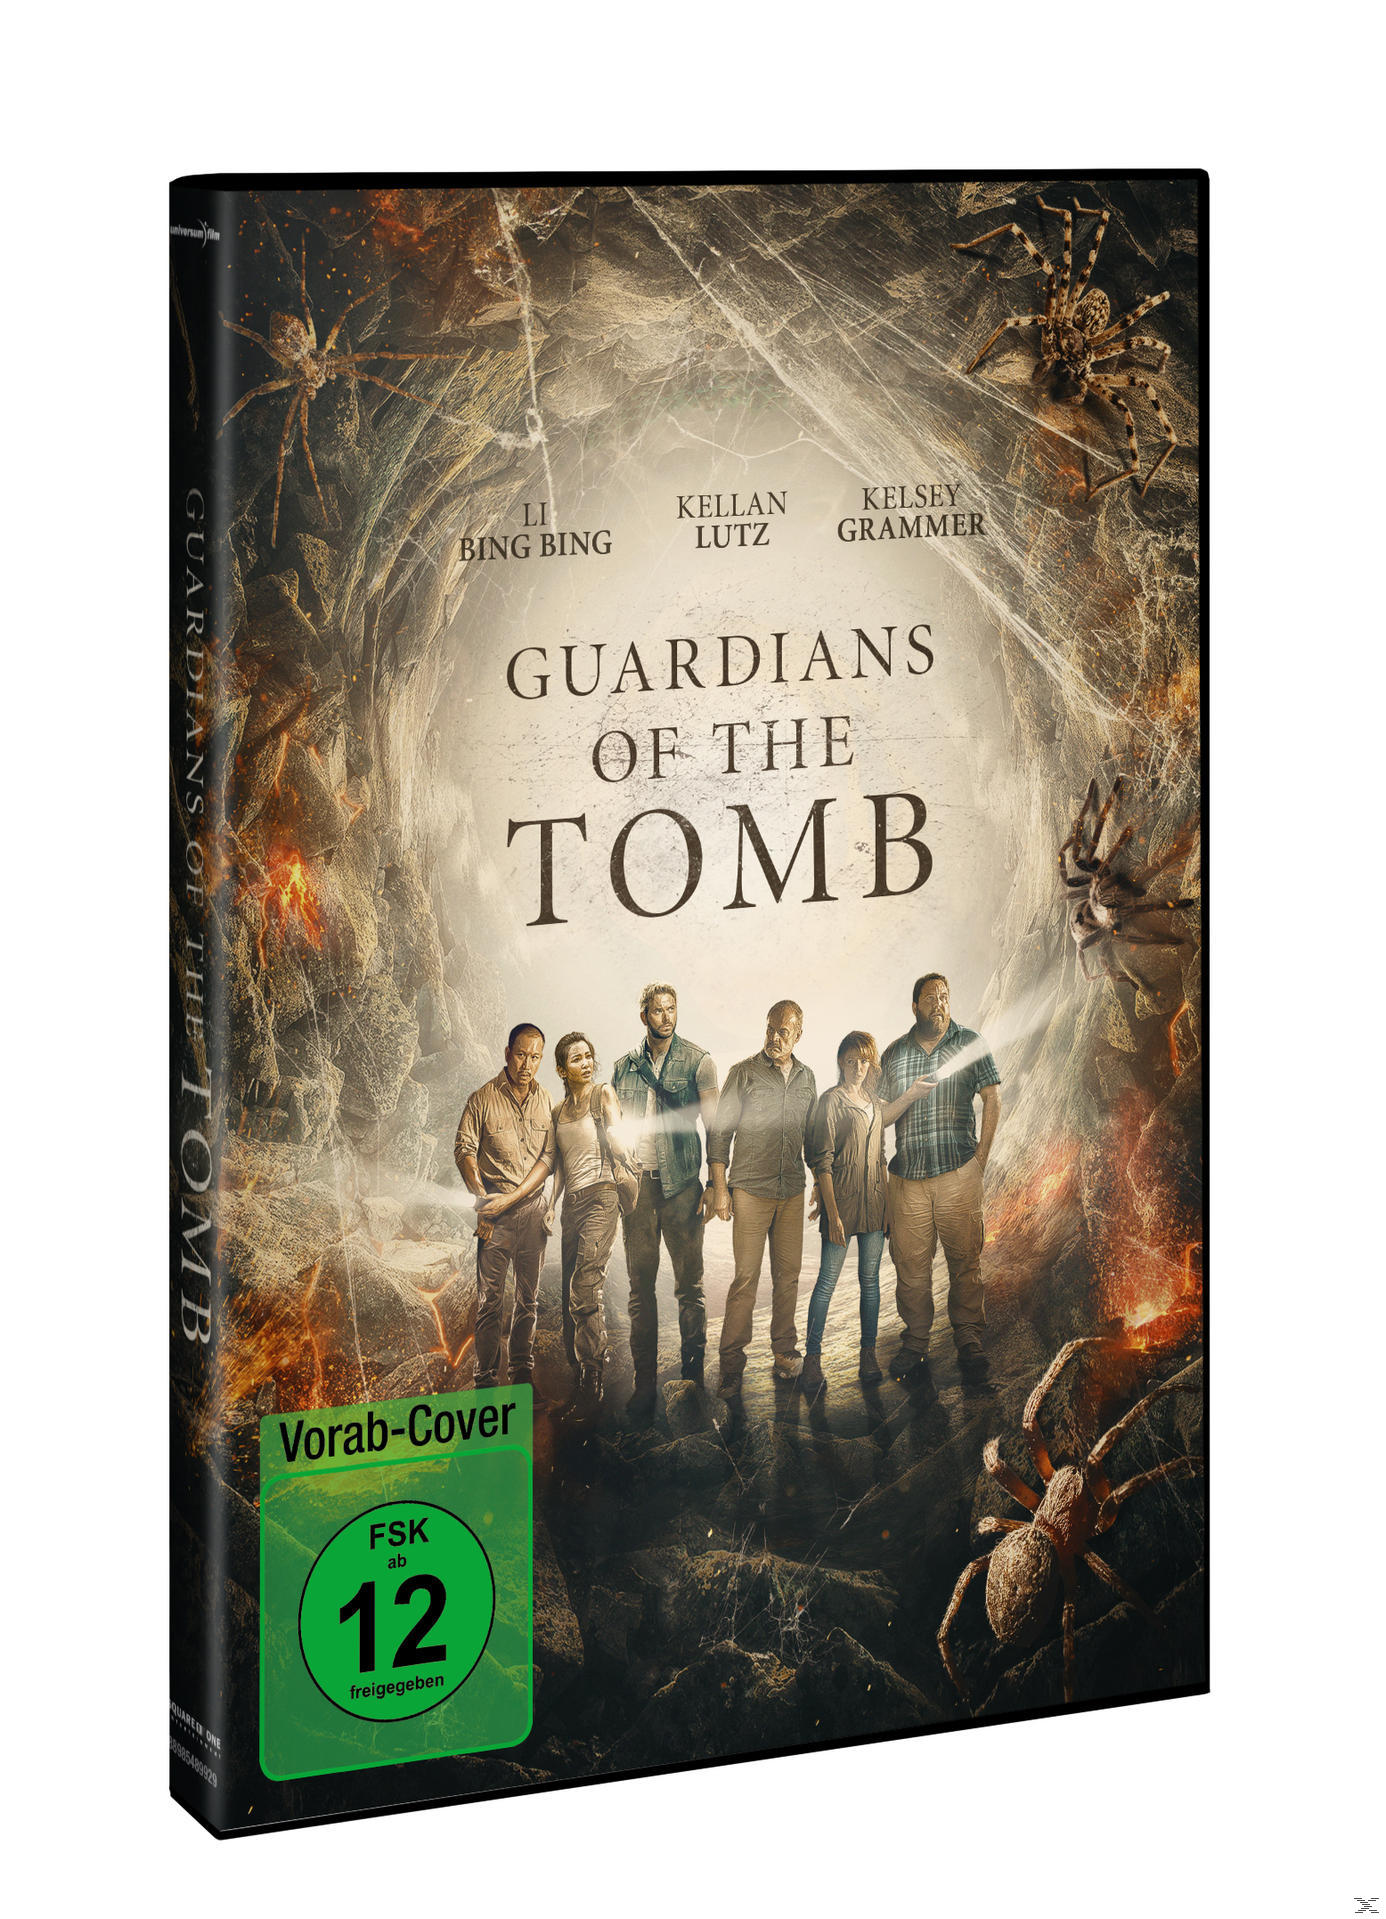 7 Guardians of the Tomb DVD